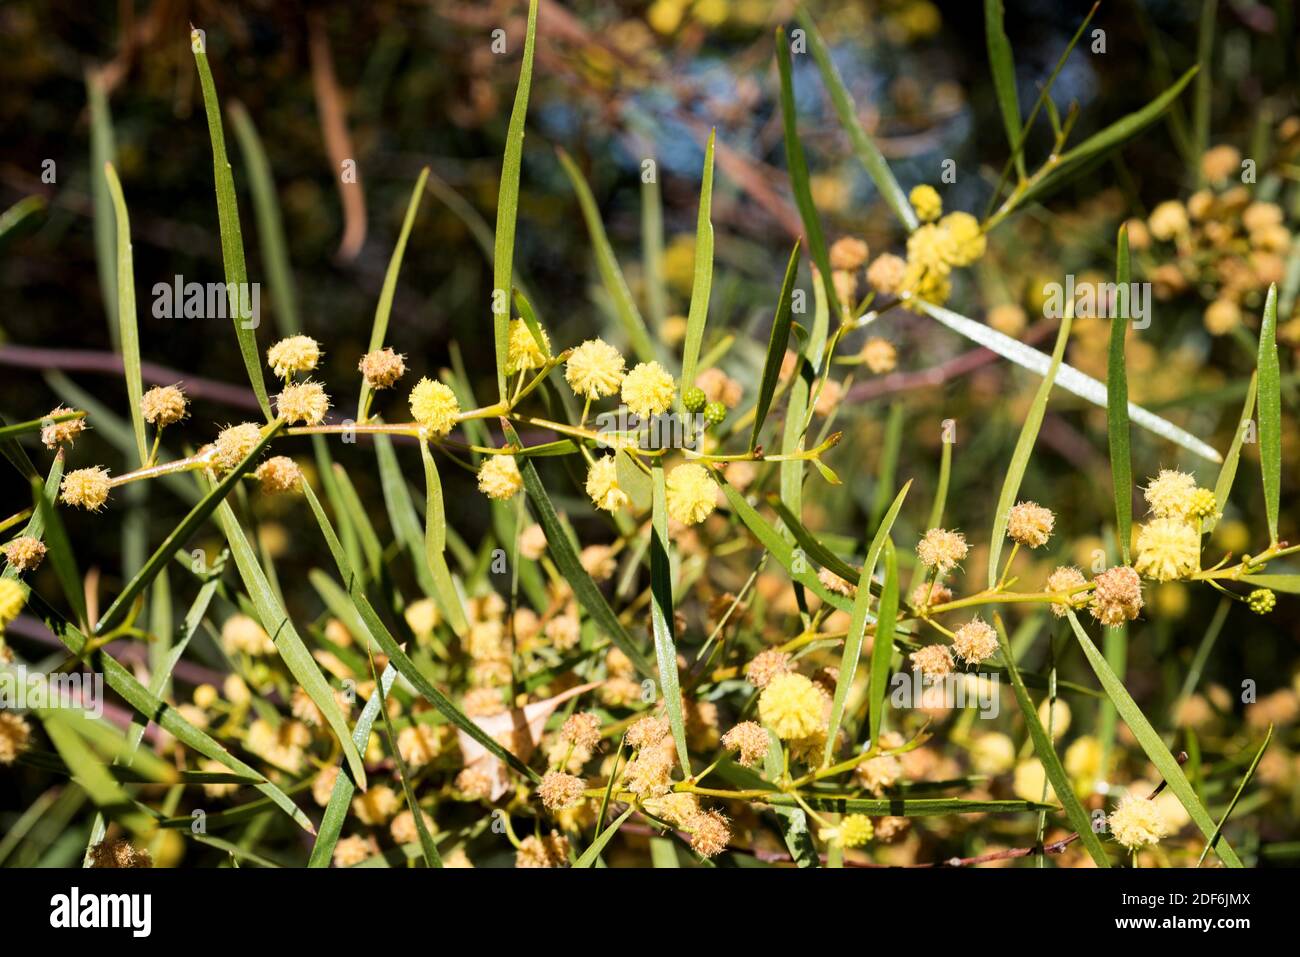 Sticky wattle or hop leaved wattle (Acacia dodonaeifolia) is a shrub native to Australia. Flowers and leaves (phyllodes) detail. Stock Photo